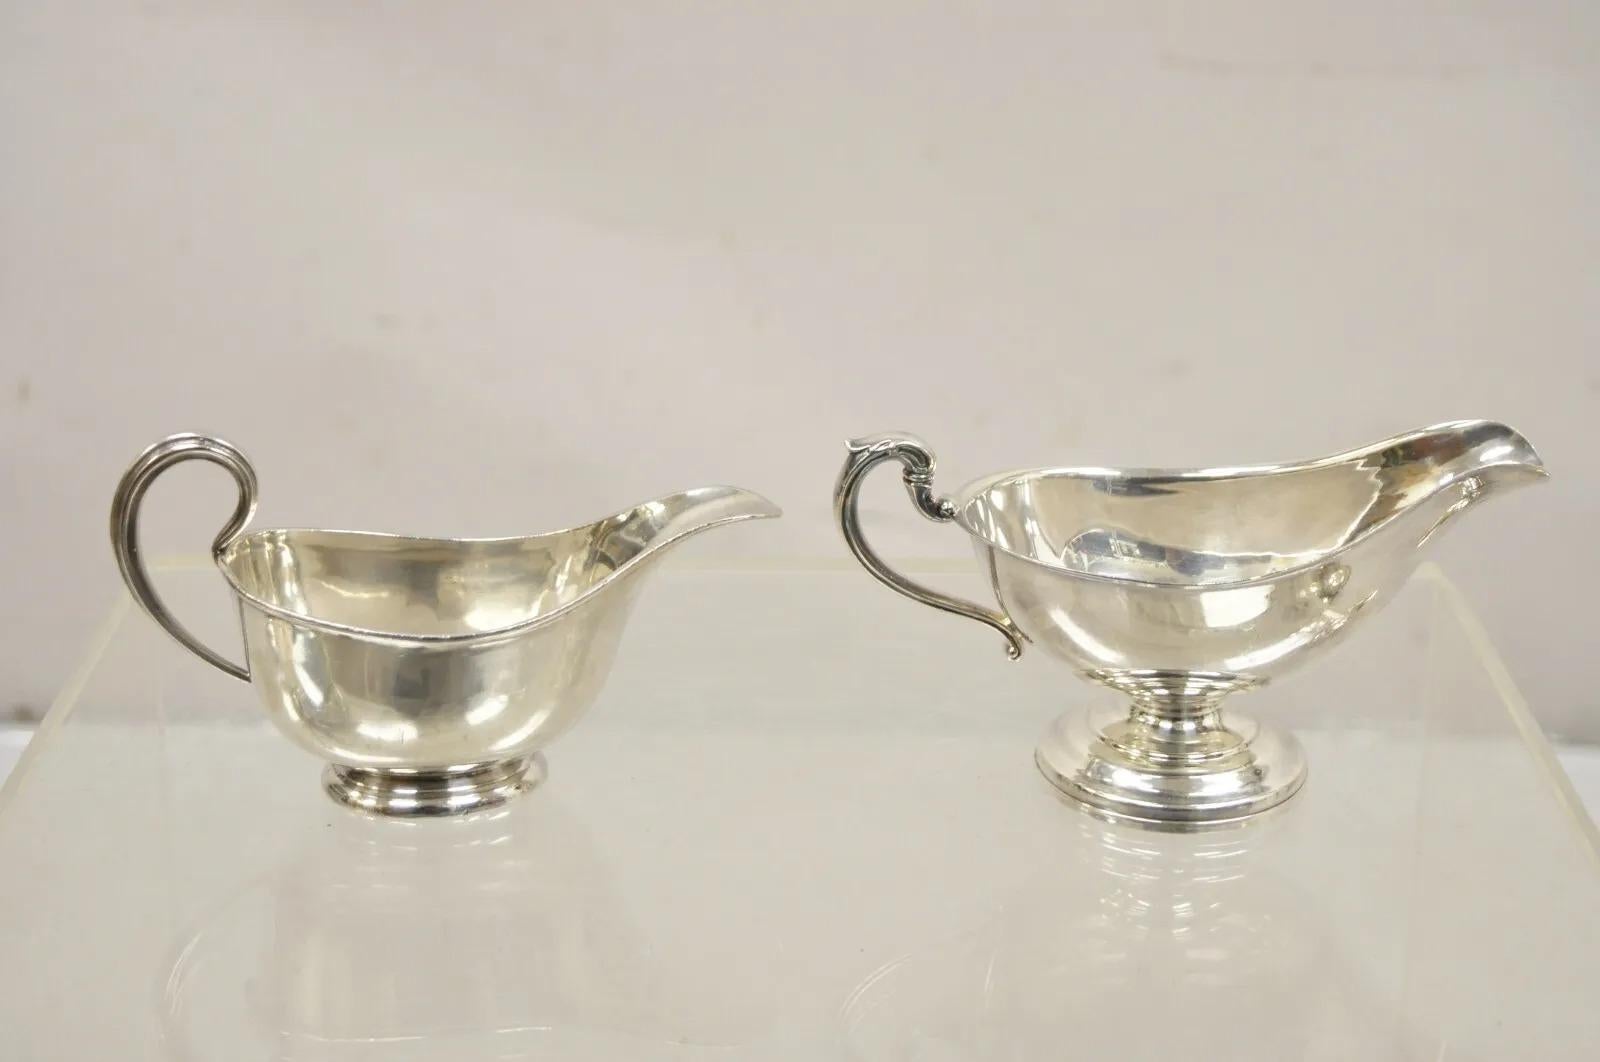 Vintage Silver Plated Victorian Serving Gravy Boat Sauce Boats - Lot of 6 For Sale 3